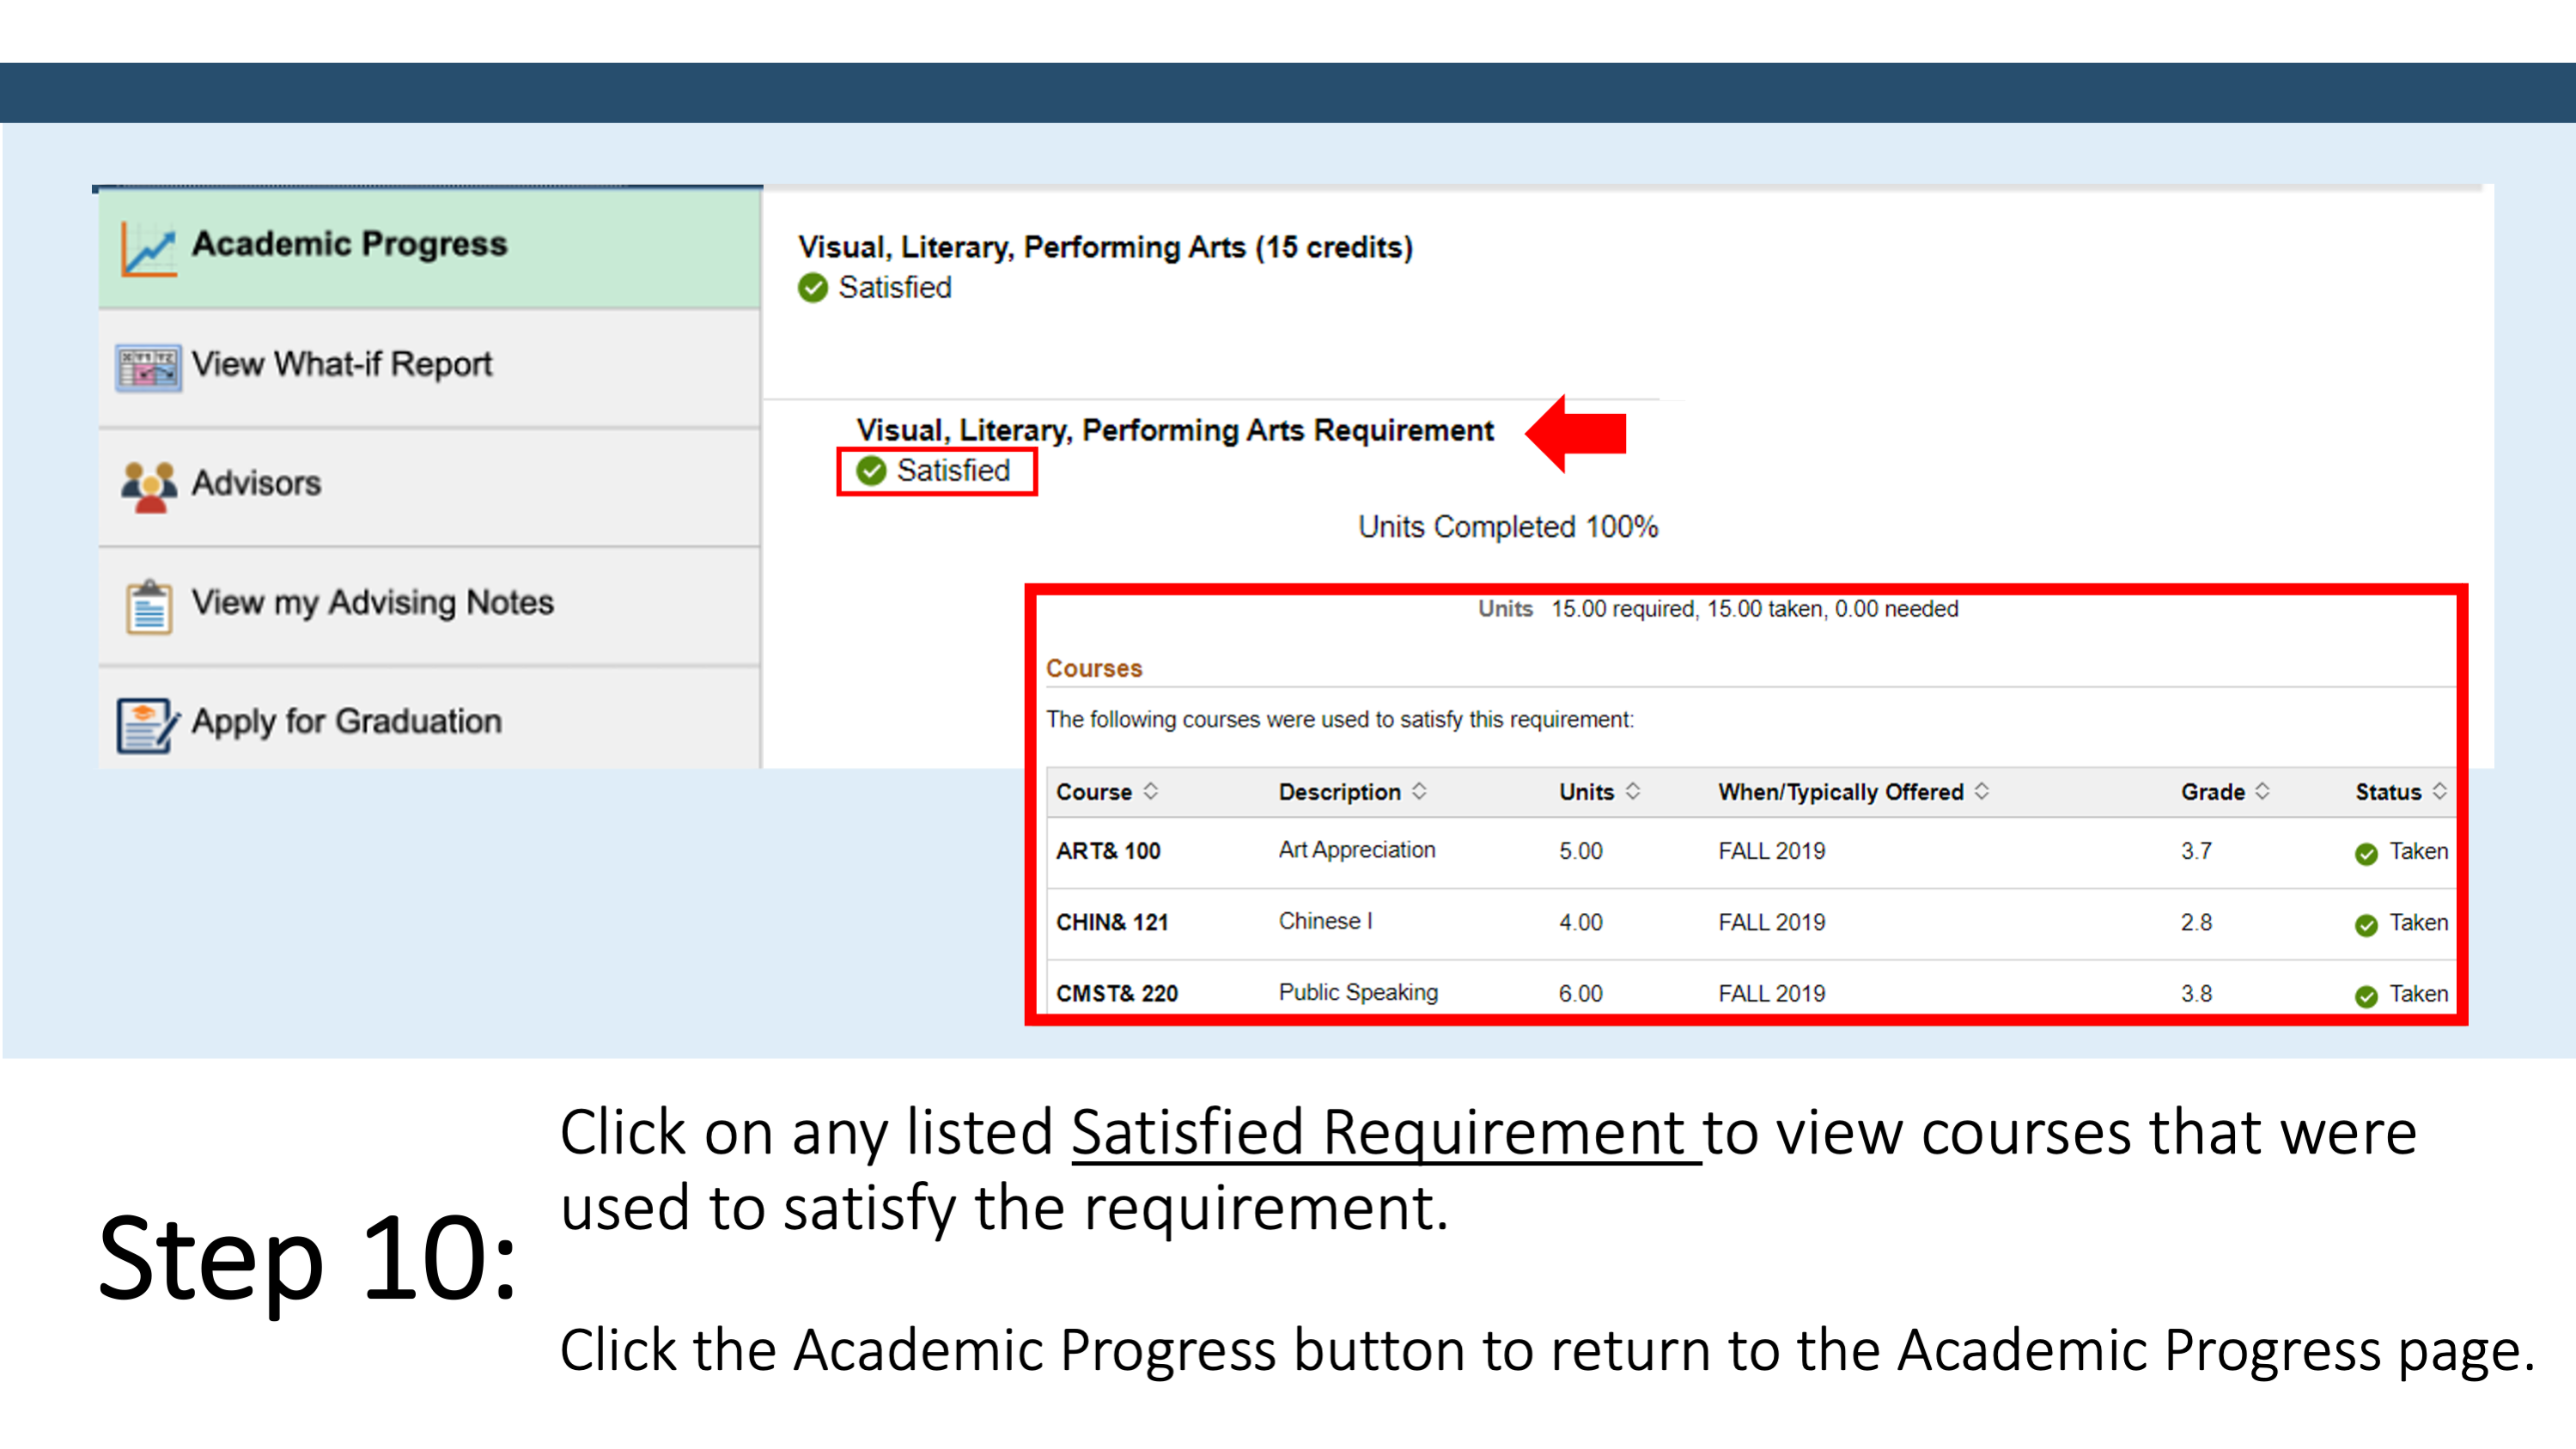 Step 10: Click on any listed Satisfied Requirement to view courses that were used to satisfy the requirement. Click the Academic Progress button to return to the Academic Progress page. 